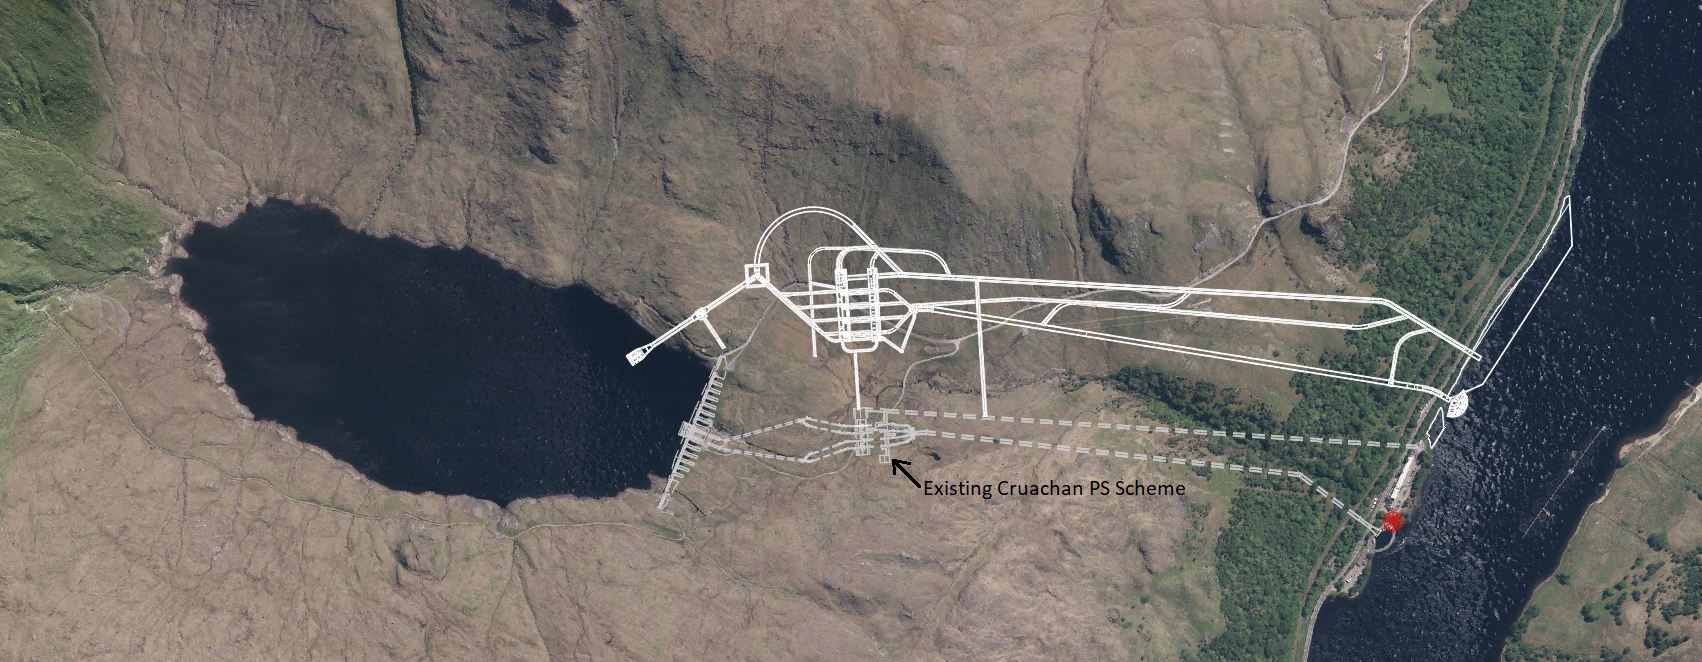 An artist's impression of Cruachan 2 (top) and the existing Cruachan Power Station (bottom)